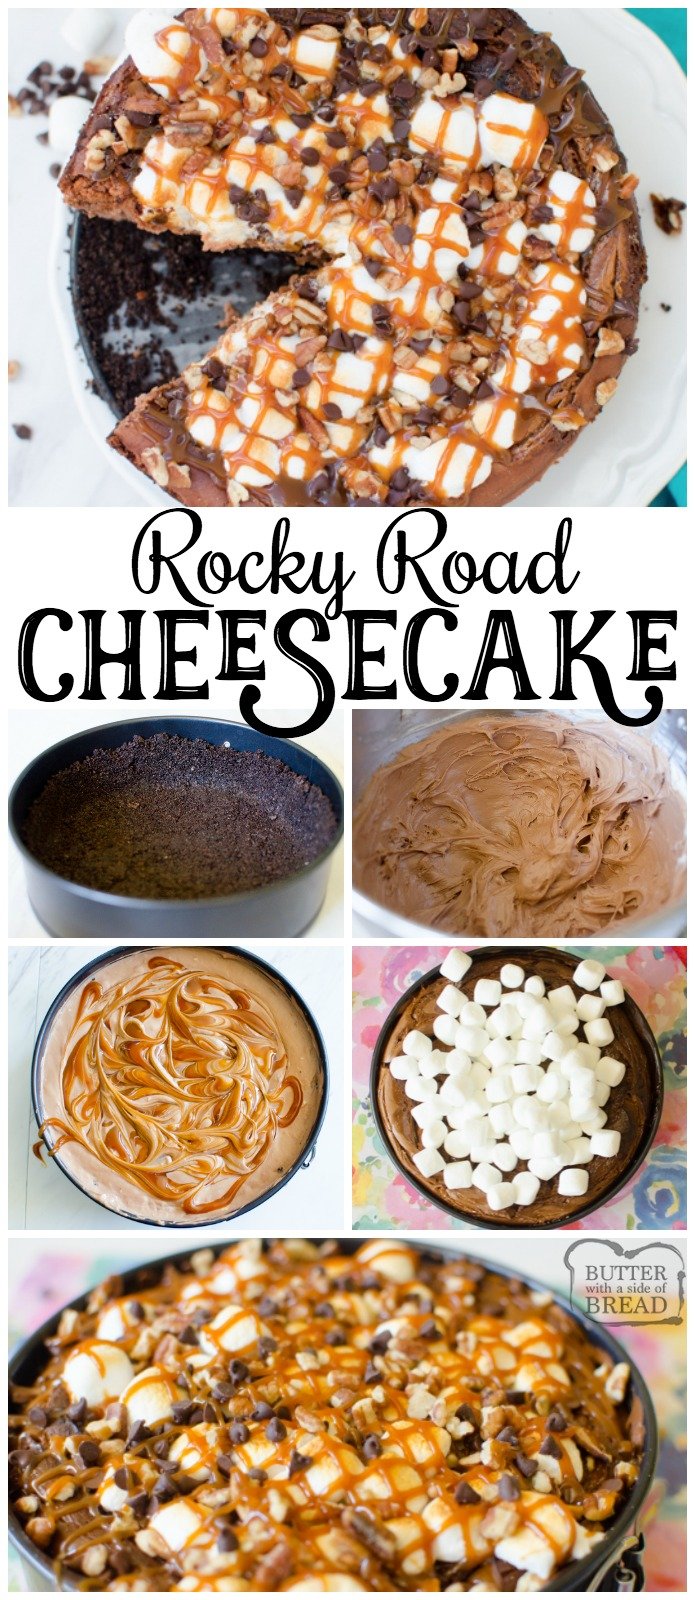 Rocky Road Cheesecake is a baked chocolate caramel swirl cheesecake with an Oreo crust. It's topped with toasted marshmallows, mini chocolate chips, pecans and caramel drizzle. This impressive looking cheesecake is an extremely easy, basic recipe that is definitely beginner friendly. #cheesecake #rockyroad #caramel #chocolate #marshmallows #dessert #recipe from Butter With A Side of Bread